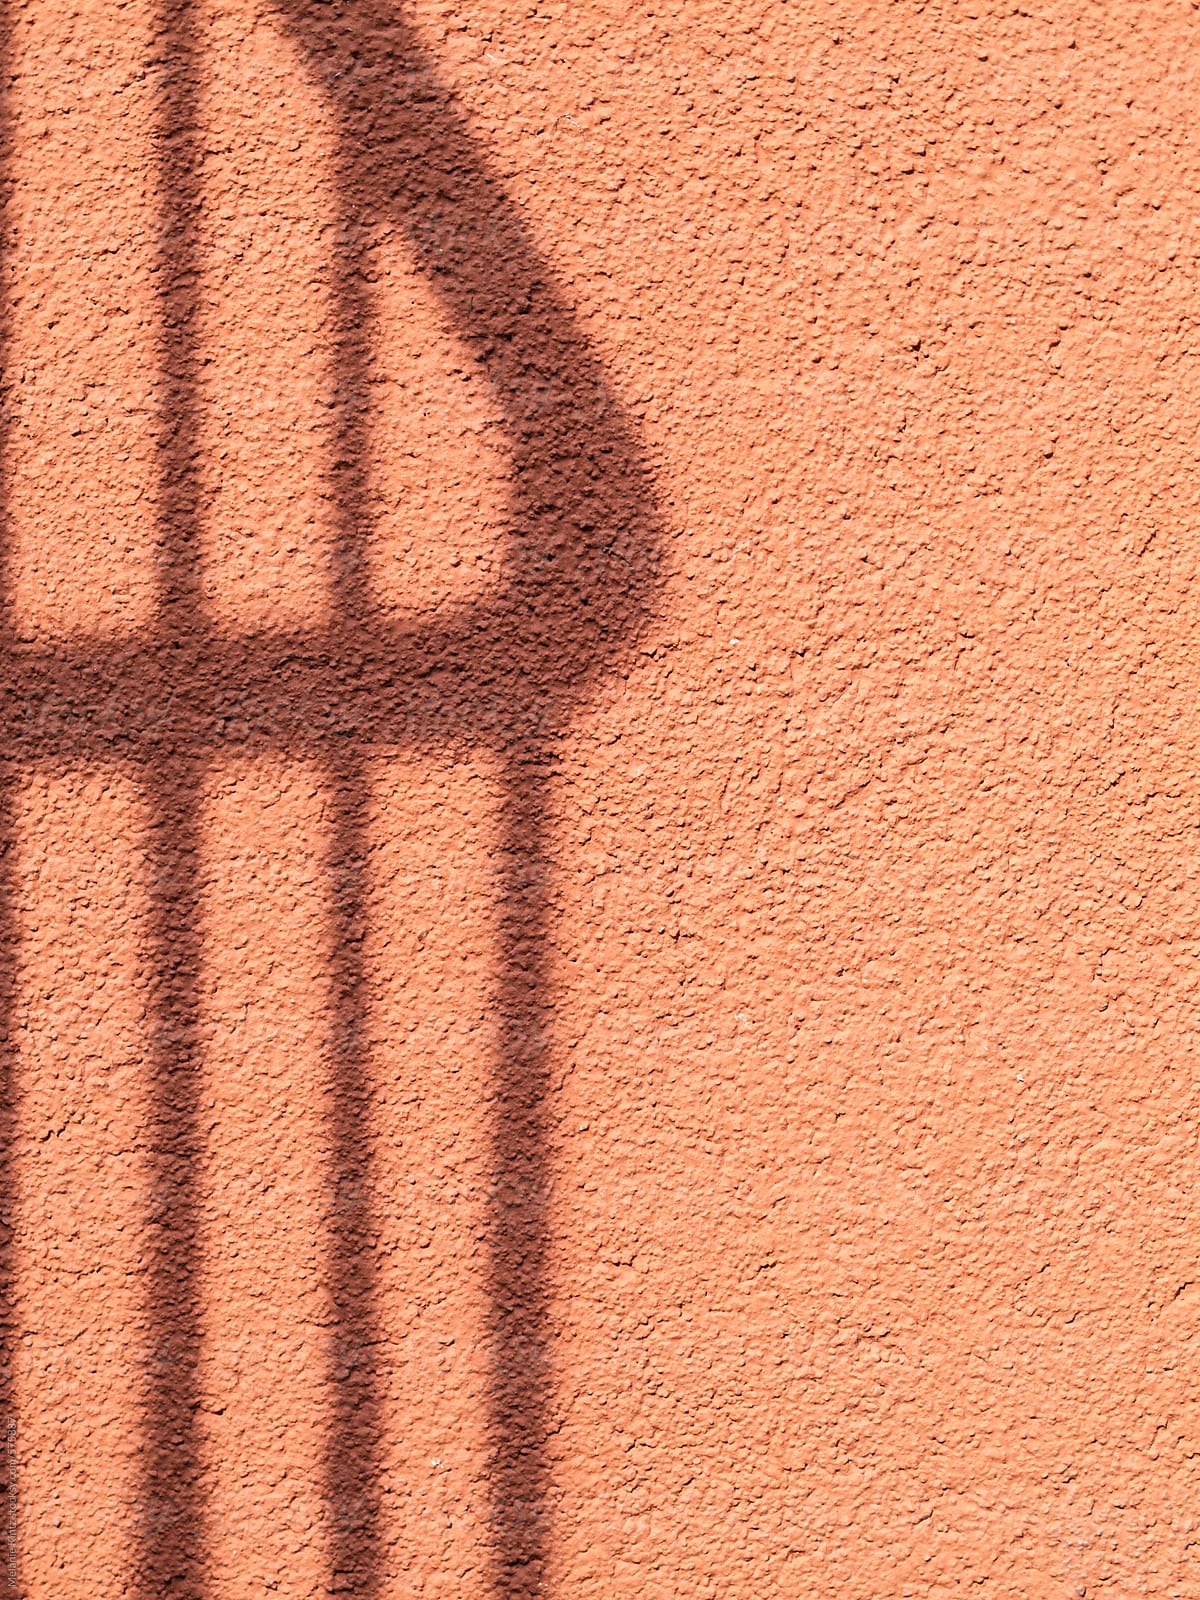 Shadow of a railing on a red wall